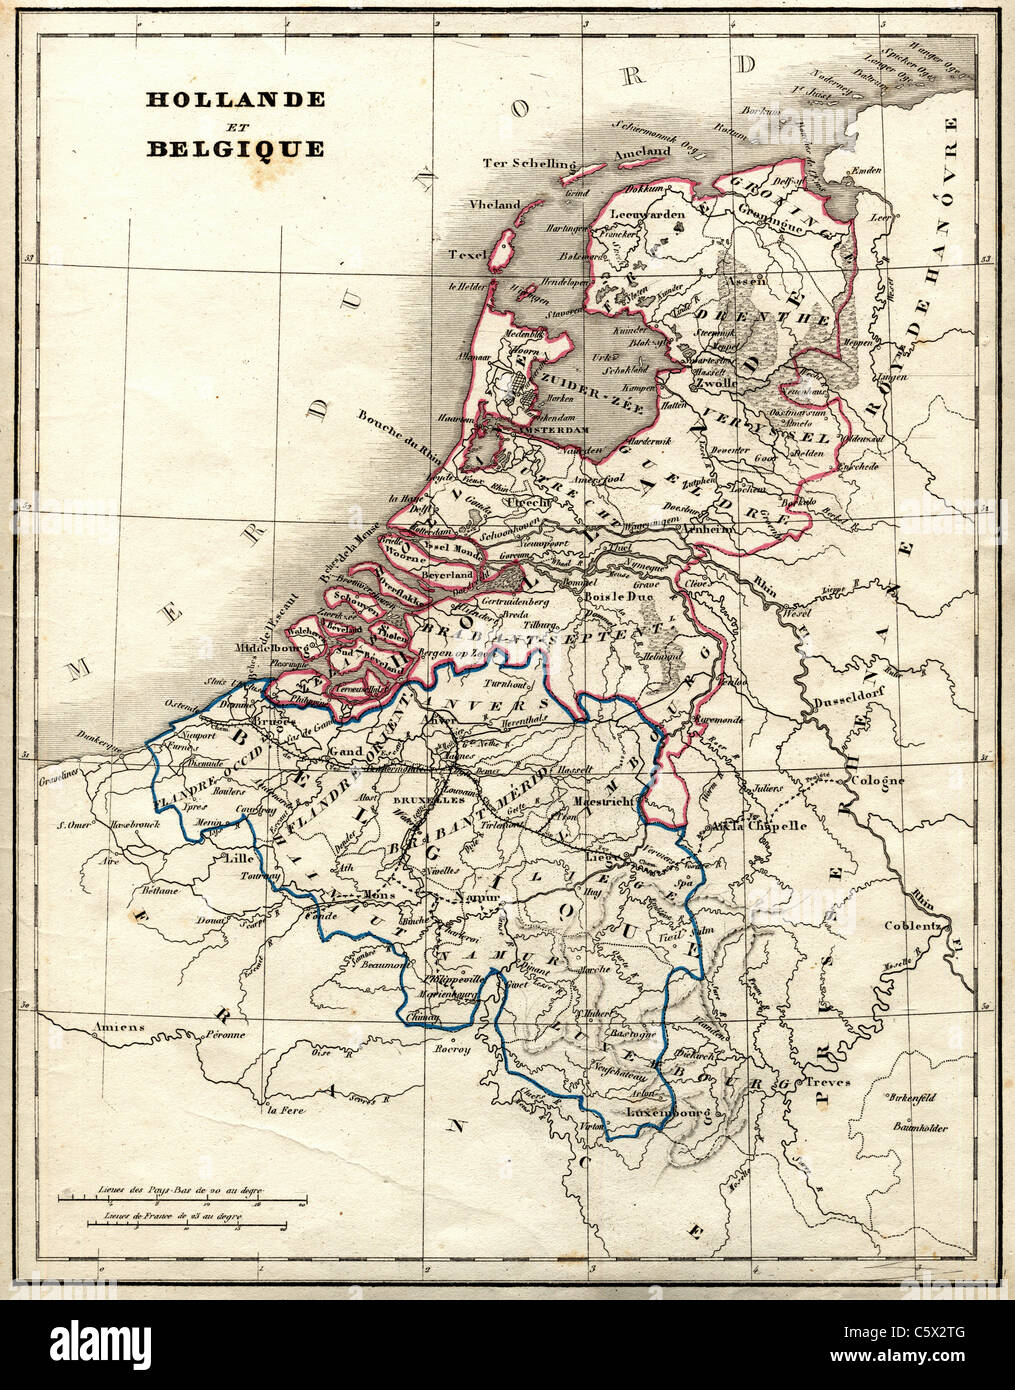 Hollande et Belgique (Holland and Belgium) Antiquarian Map from 'Atlas Universel de Geographie Ancienne and Moderne' by cartographer C. V. Monin Stock Photo